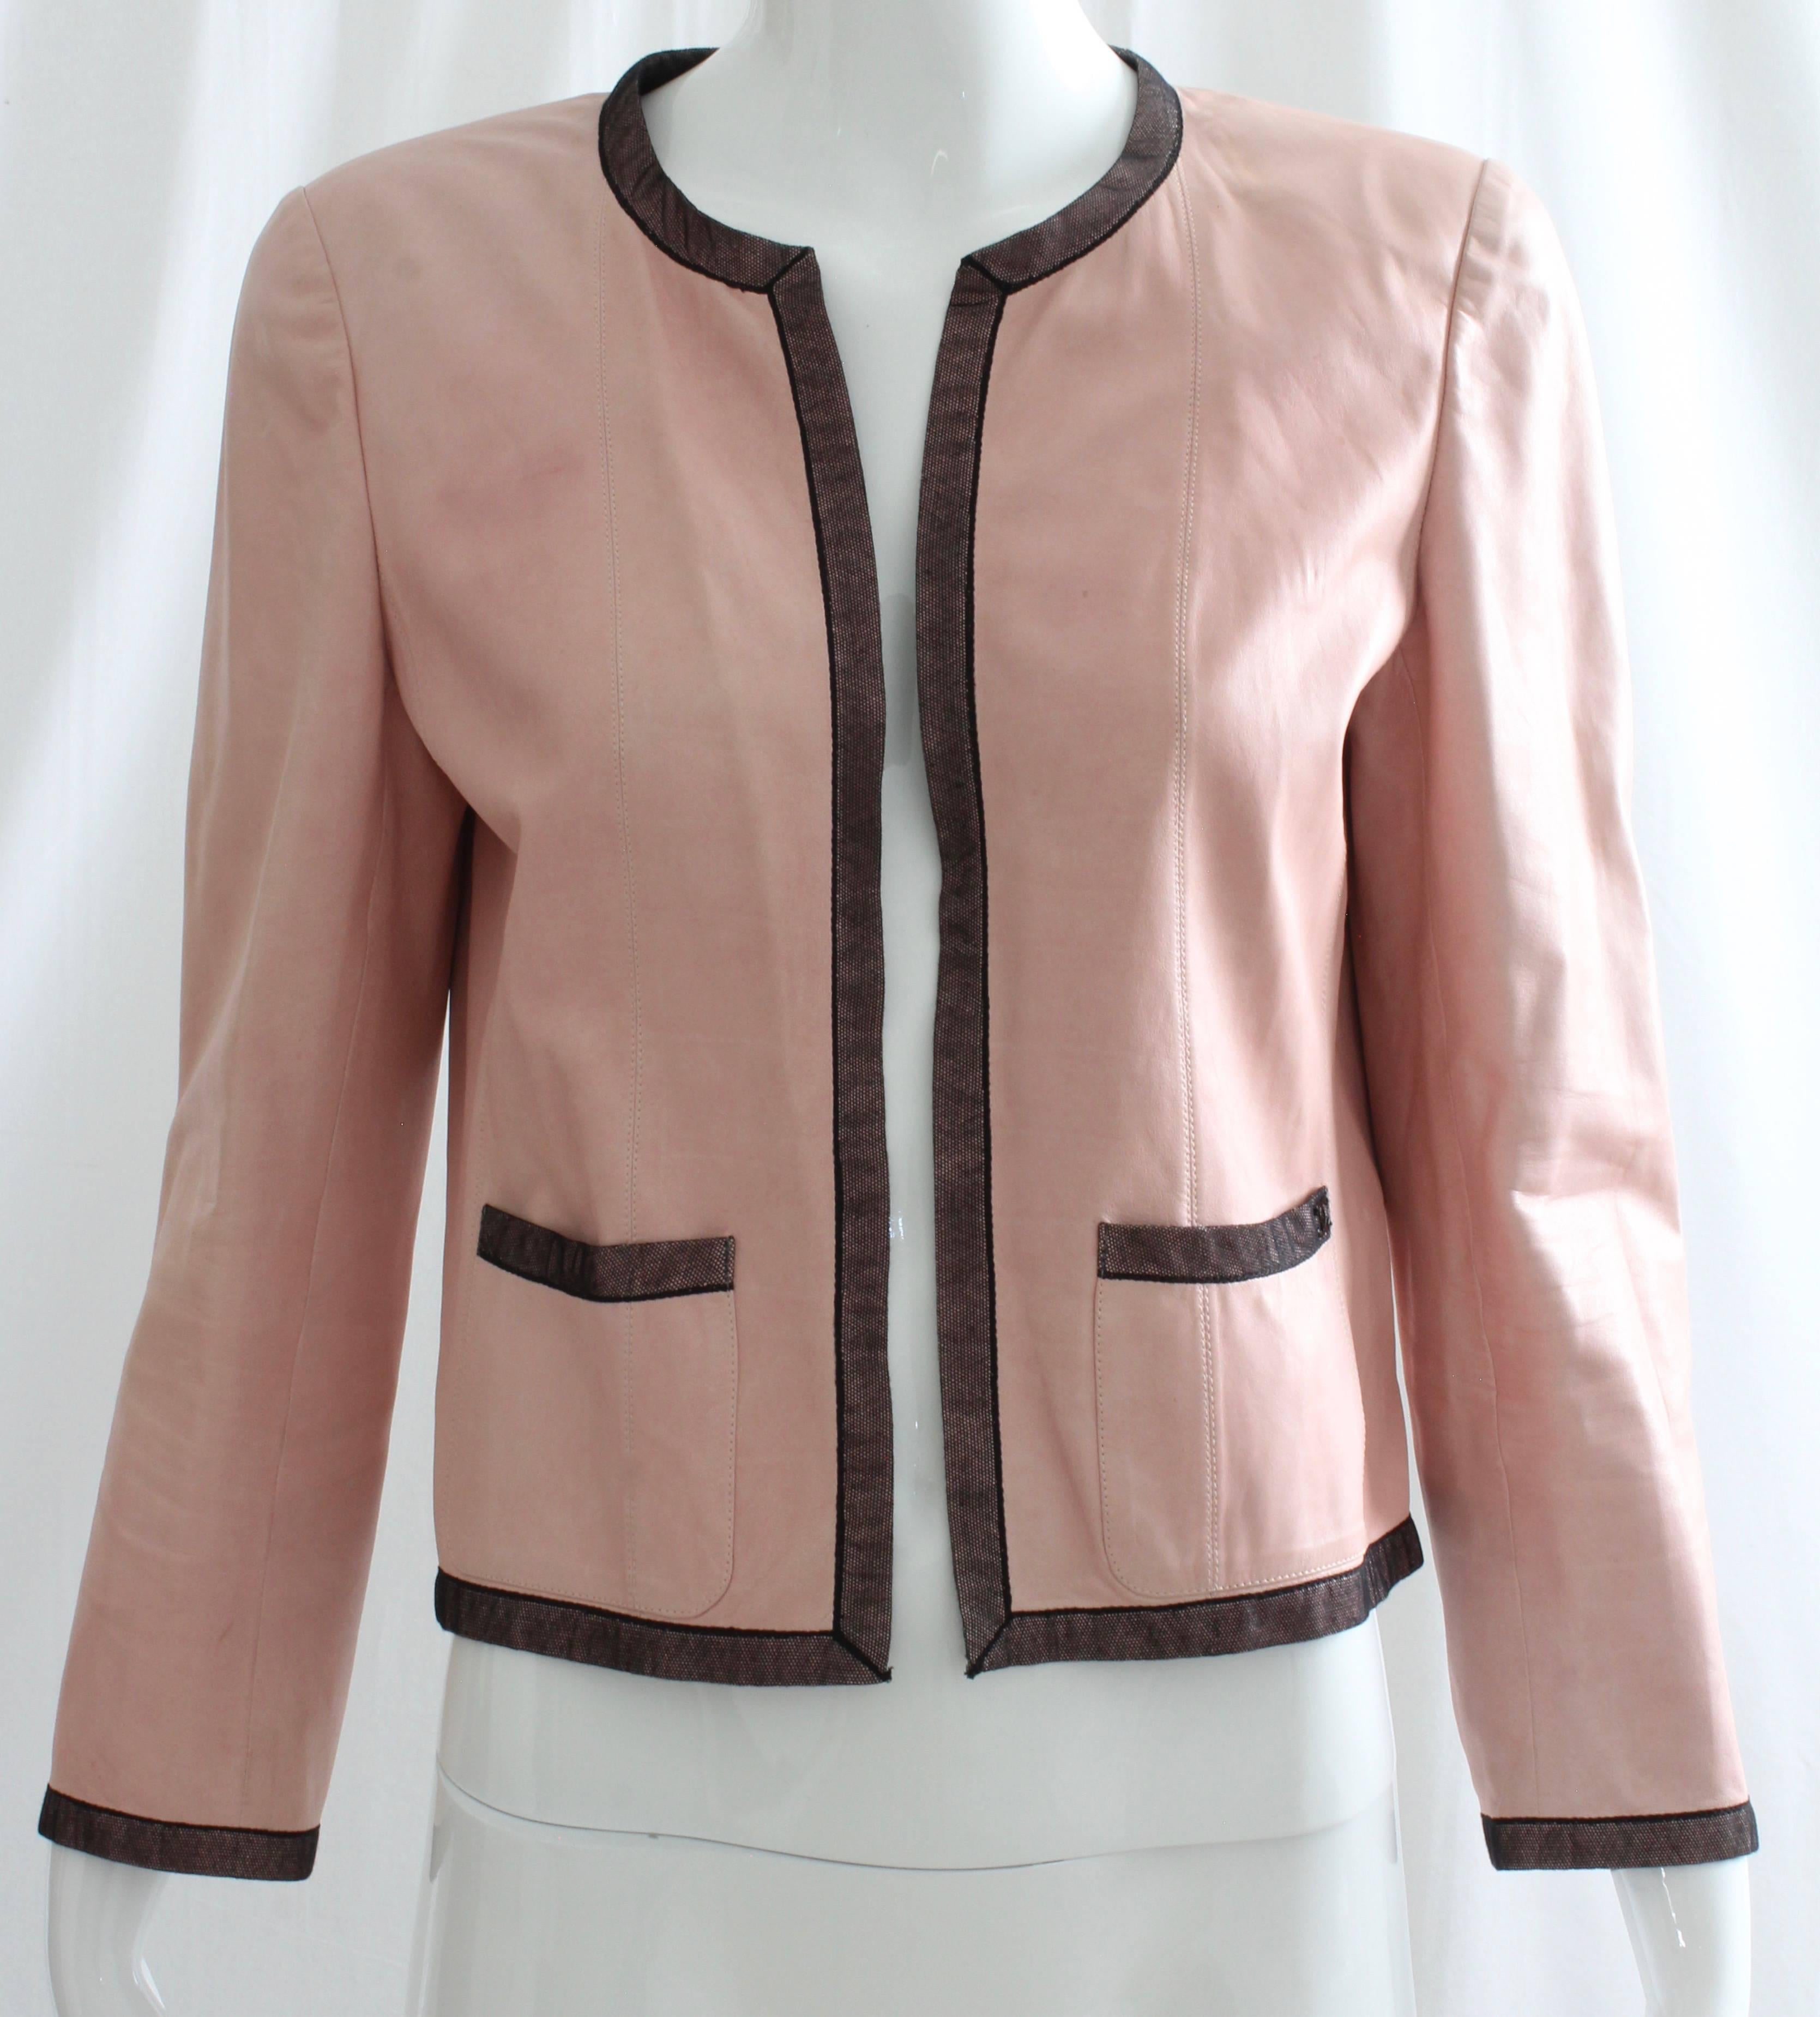 Preowned and authentic Chanel pink leather jacket with black mesh trim. Unlined and no closures (meant to wear open). Preowned/vintage w/signs of use/wear: pencil tip spot to right sleeve bottom, marker tip size spot to left side of chest & one